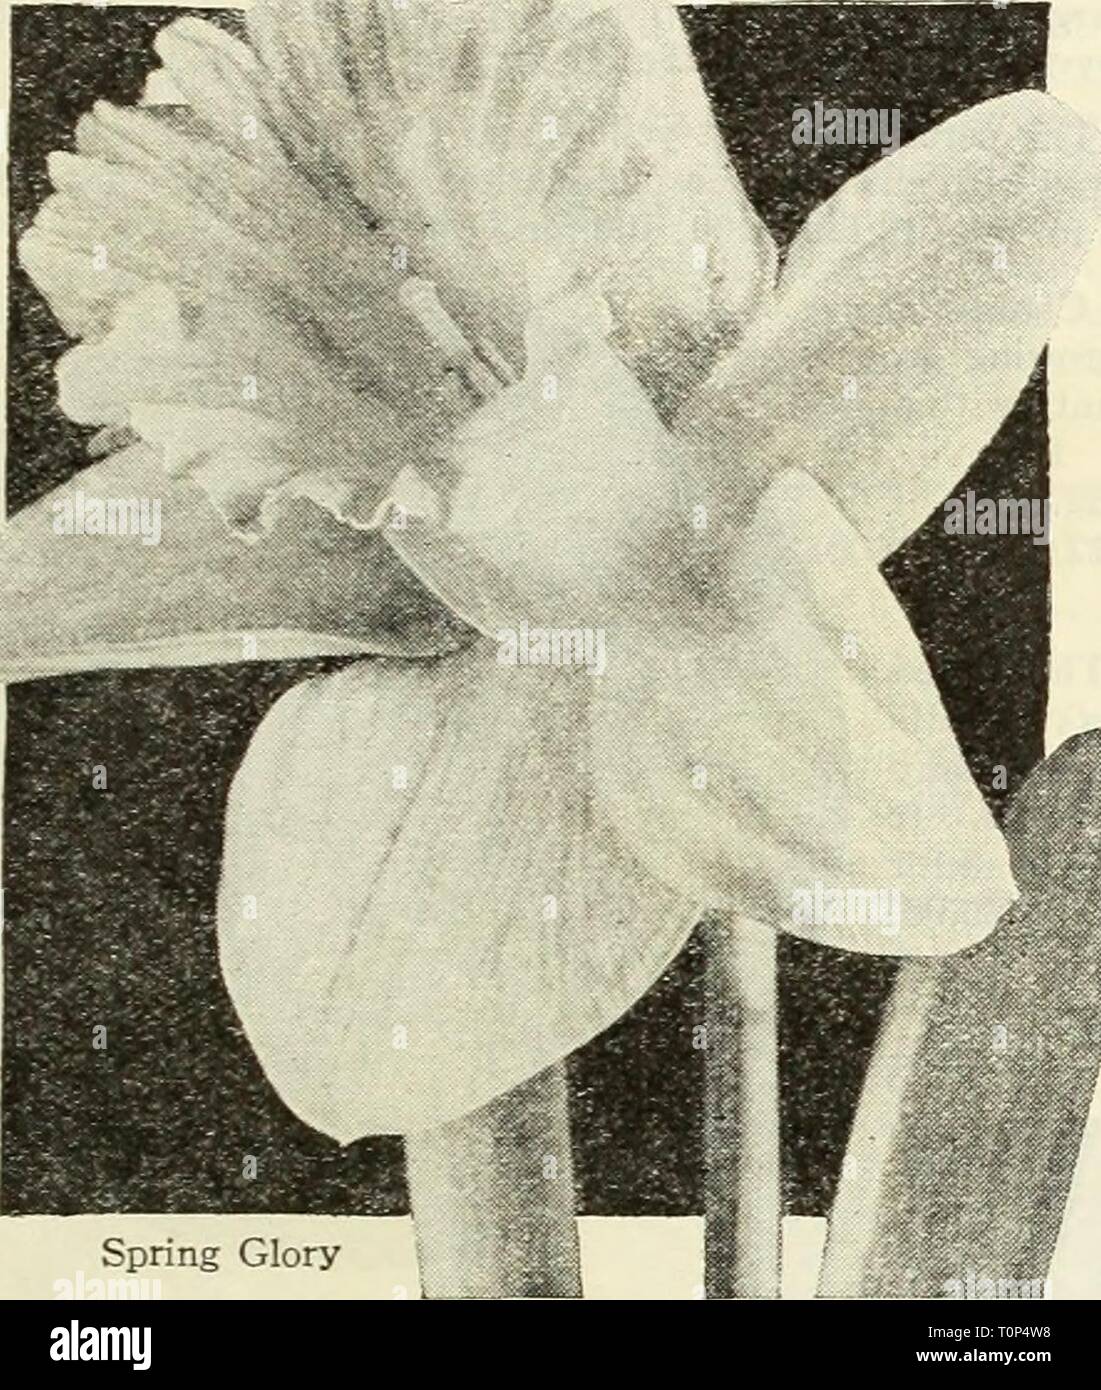 Dreer's bulbs  plants, shrubs, Dreer's bulbs : plants, shrubs, and seeds for fall planting  dreersbulbsplant1936henr Year: 1936  Narcissus or Daffodils Prince of Wales. A show&gt;%%%% well-fonned flower of bold and stately appearance. The color is a lovely uniform light yellow that gives a splendid contrast against the vigorous rich green foliage. 3 for 45c; 12 for $1.50; 100 for $11.00. Robert Sydenham. Massive, well-proportioned blooms with wide overlapping perianth petals of a clear yellow with a very large, well expanded and nicely frilled golden yellow trumpet. Grows 18 to 20 inches high. Stock Photo